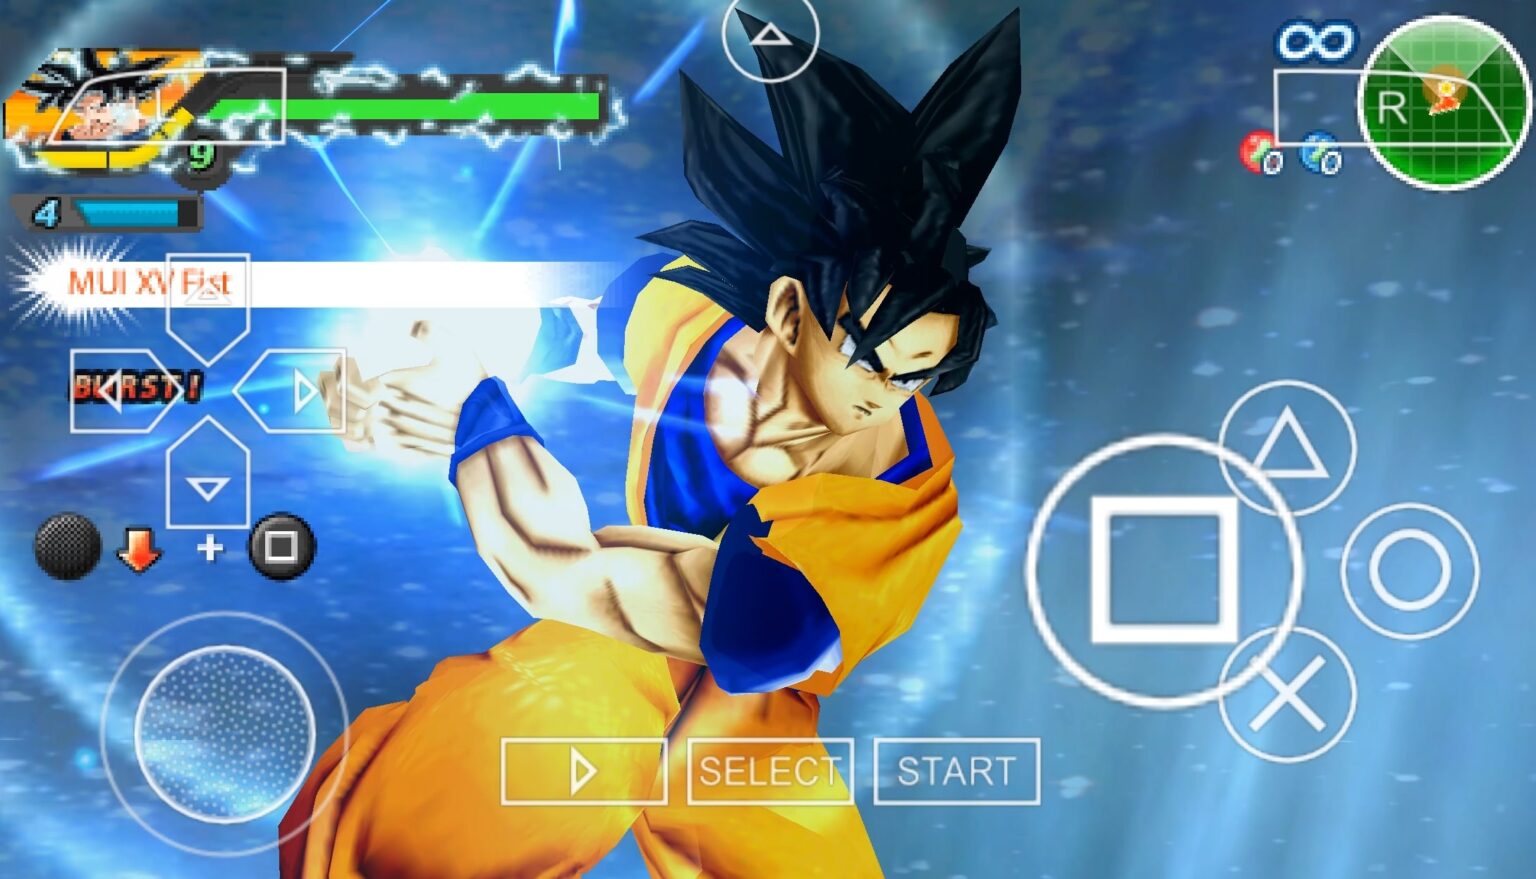 super dragon ball heroes game download for android